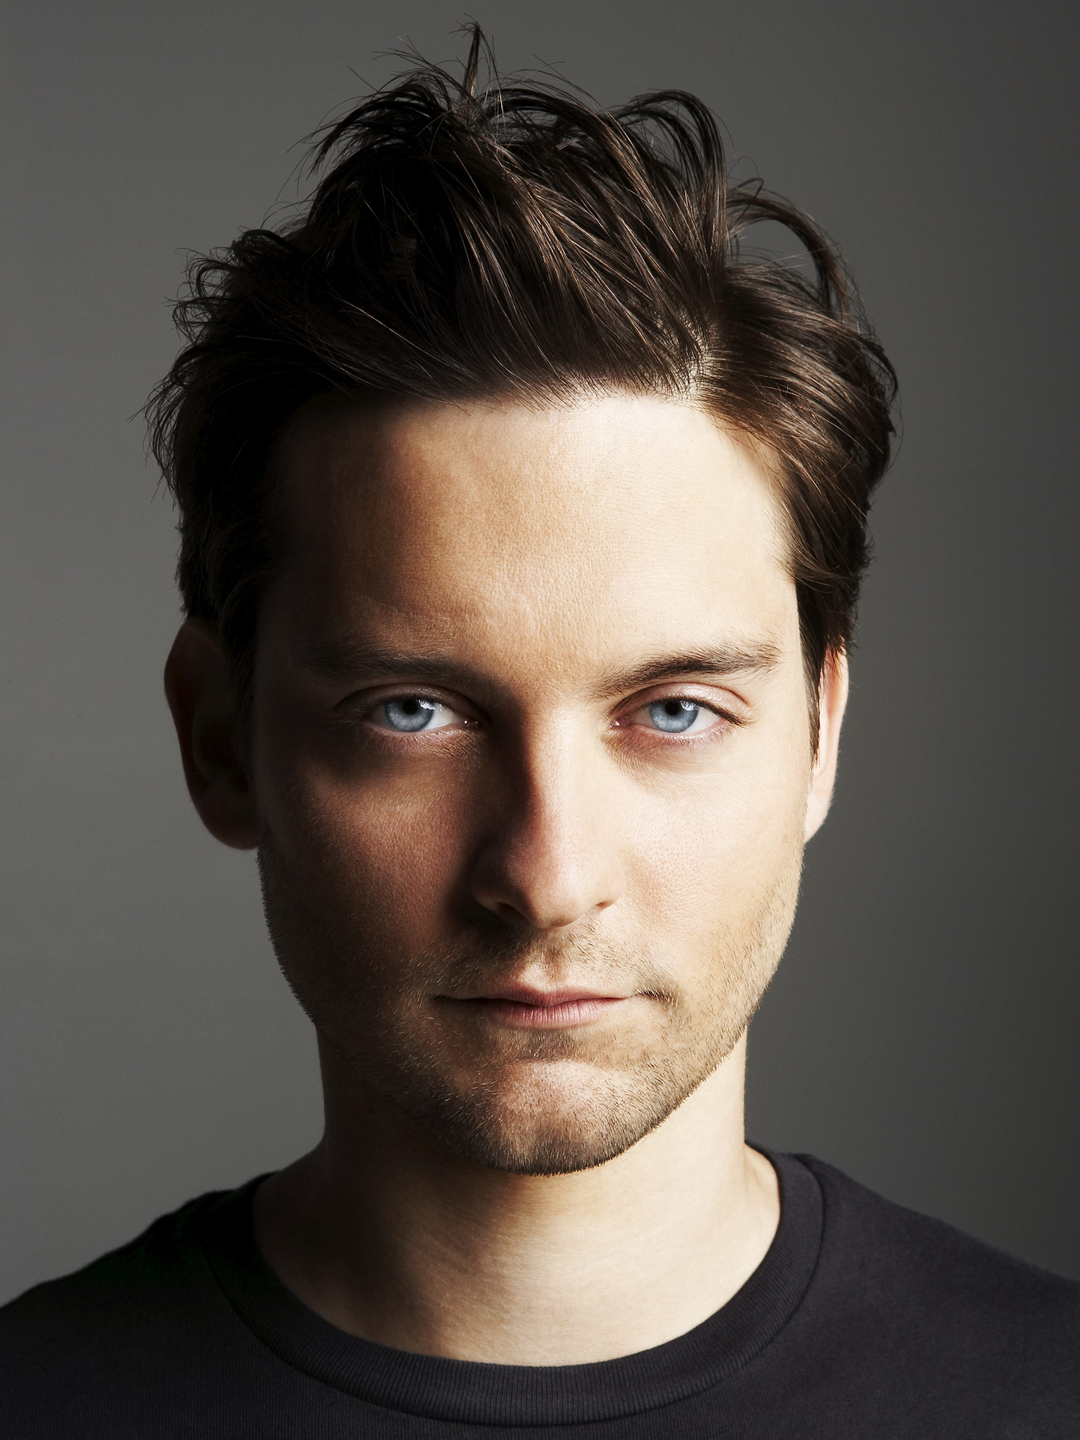 Tobey Maguire who is his father